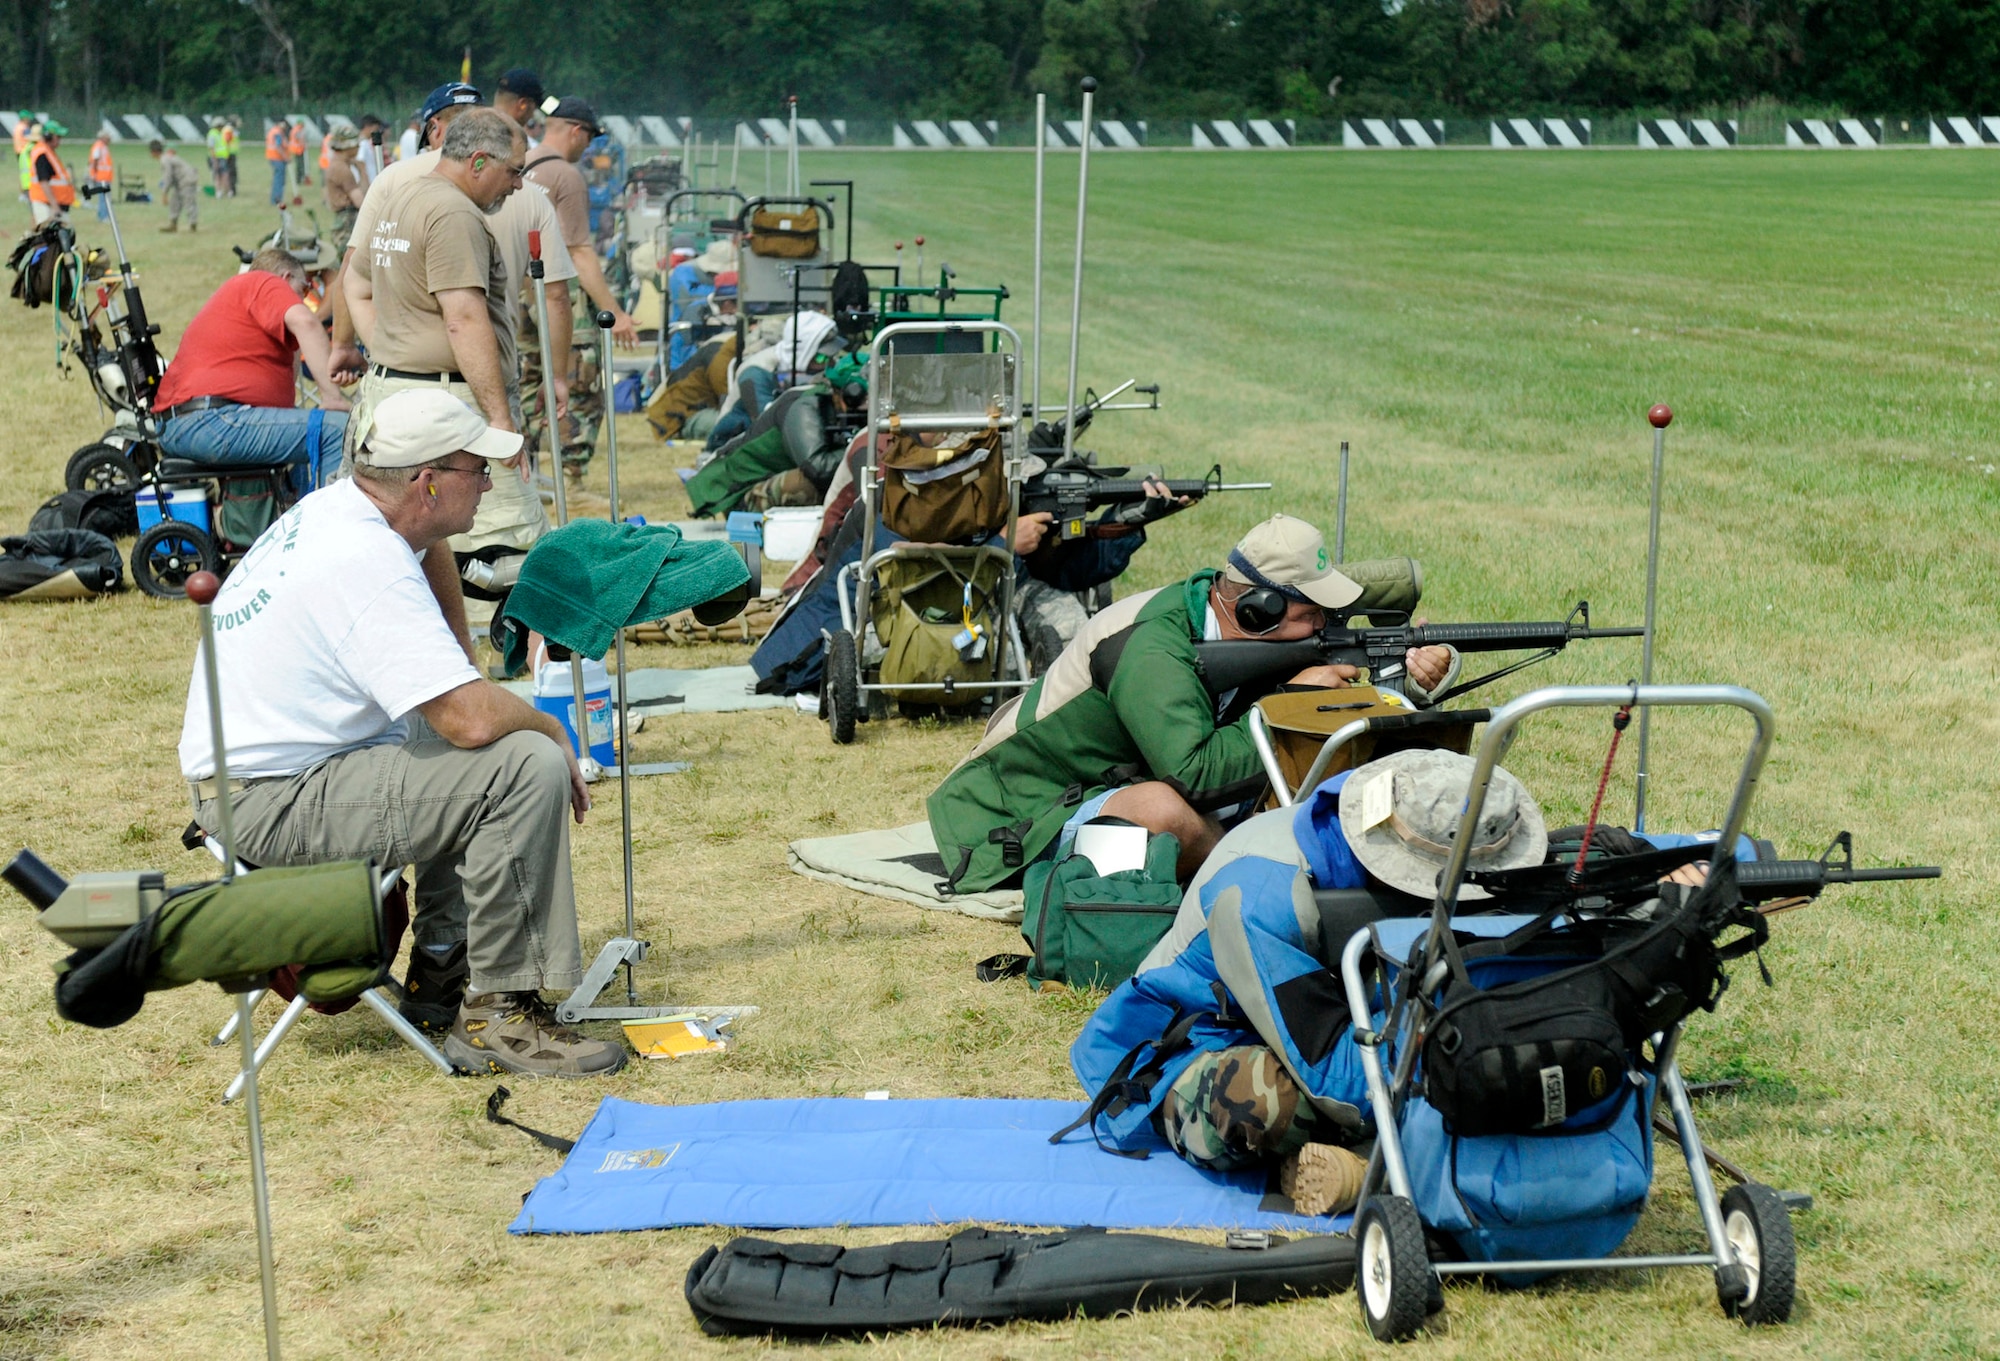 Competitors fire from the prone position during the 600-meter portion of the high power rifle competition of the National Rifle and Pistol Championships Aug. 11 at Camp Perry, Ohio. The championships are sponsored by the National Rifle Association and draw several thousand marksmen from around the United States, including teams from the Army, Air Force, Navy and Marines. (U.S. Air Force photo/Staff Sgt. Matthew Bates)